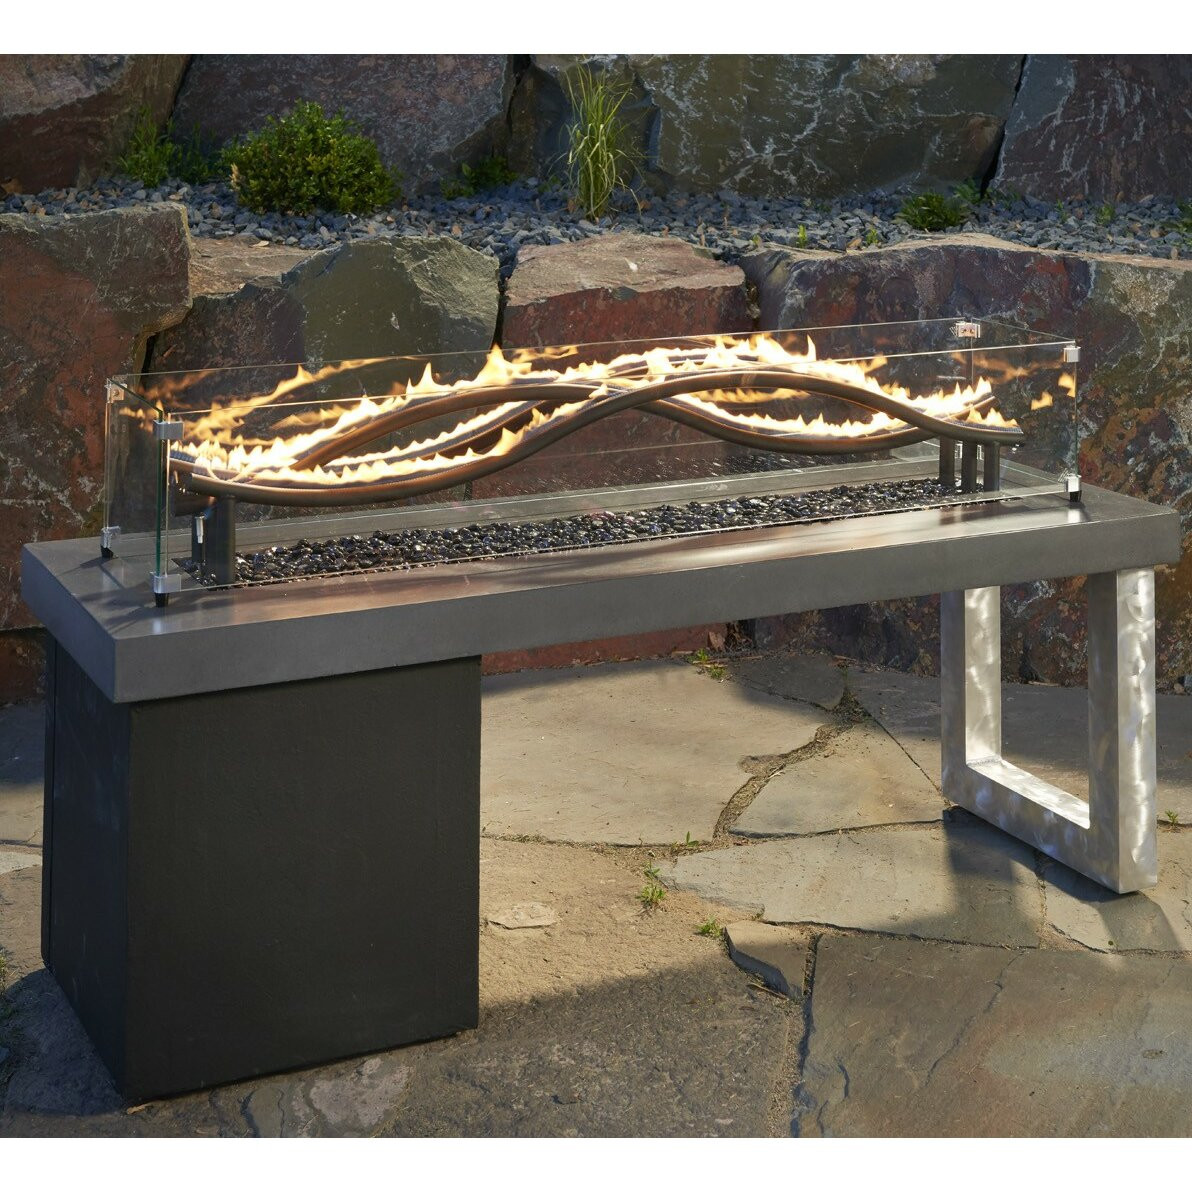 Propane Patio Fire Pit
 The Outdoor GreatRoom pany Wave Propane Fire Pit